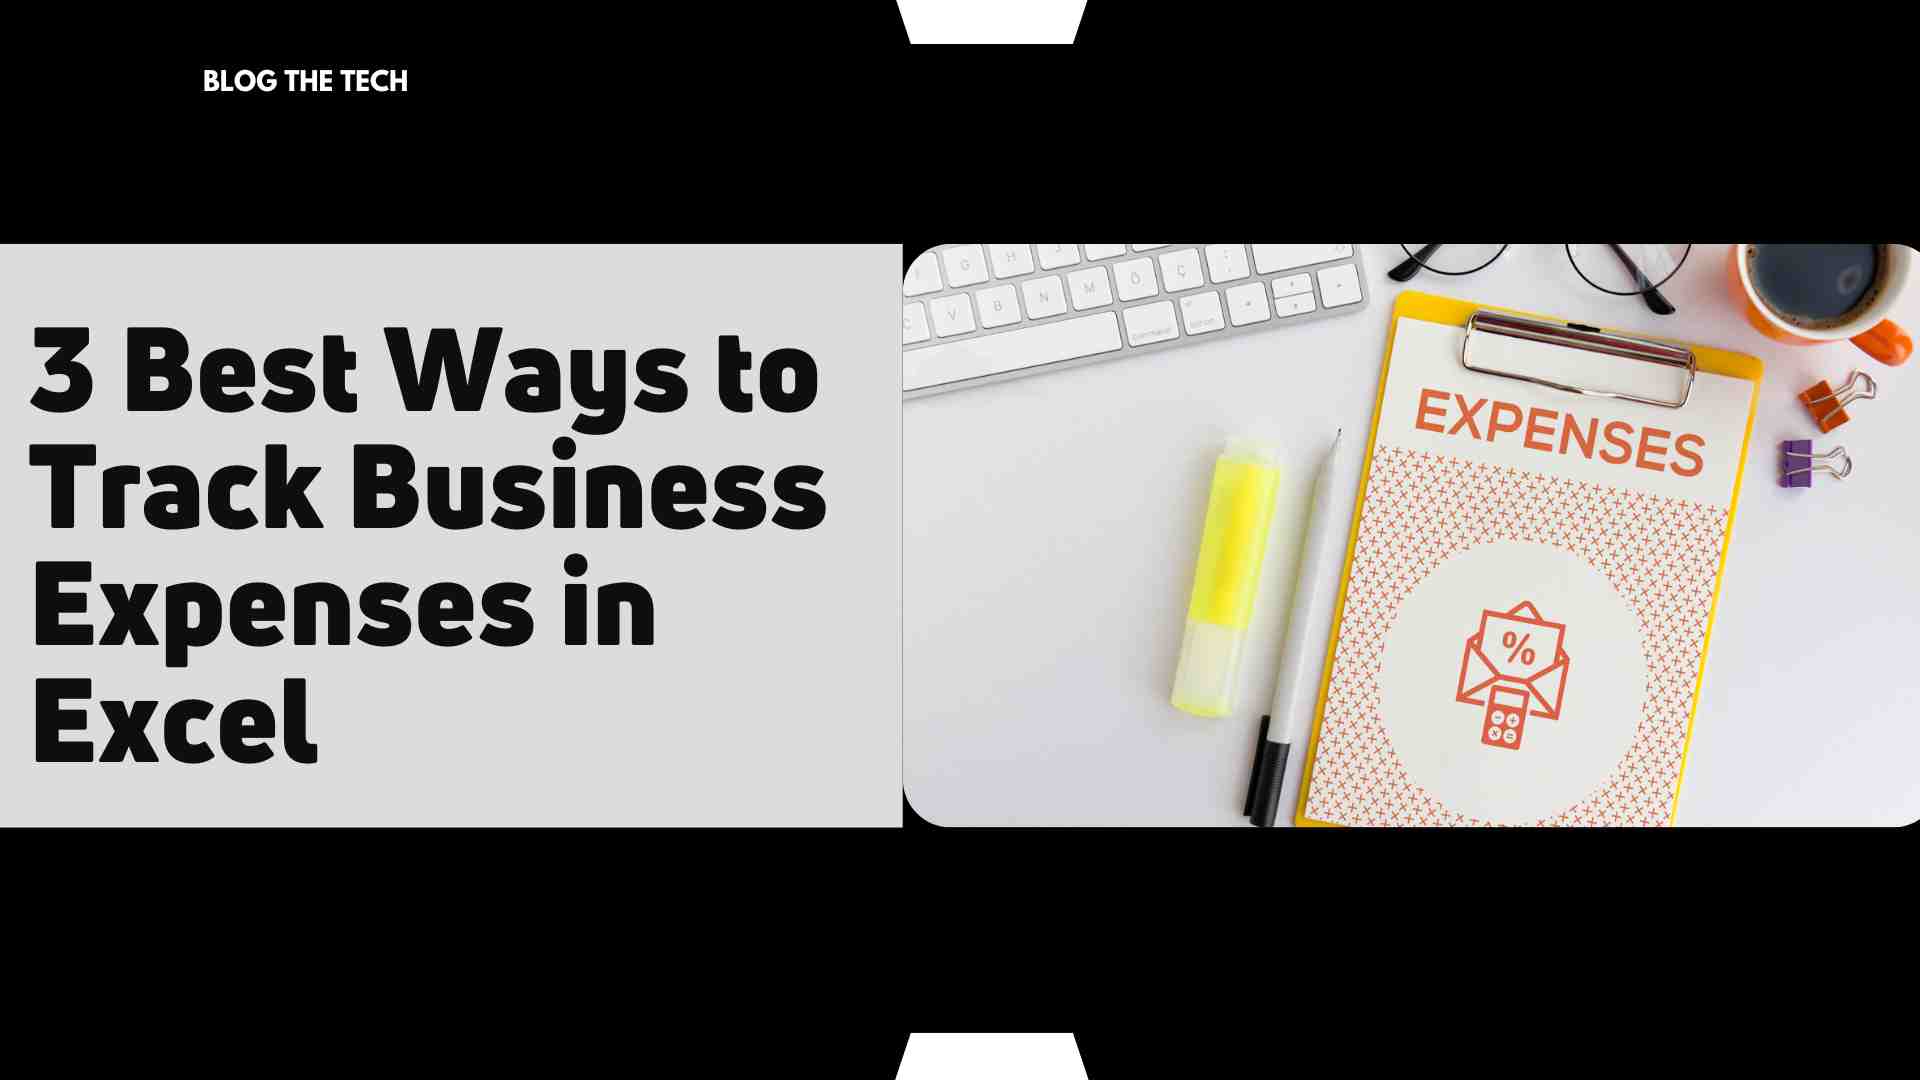 3 Best Ways to Track Business Expenses in Excel